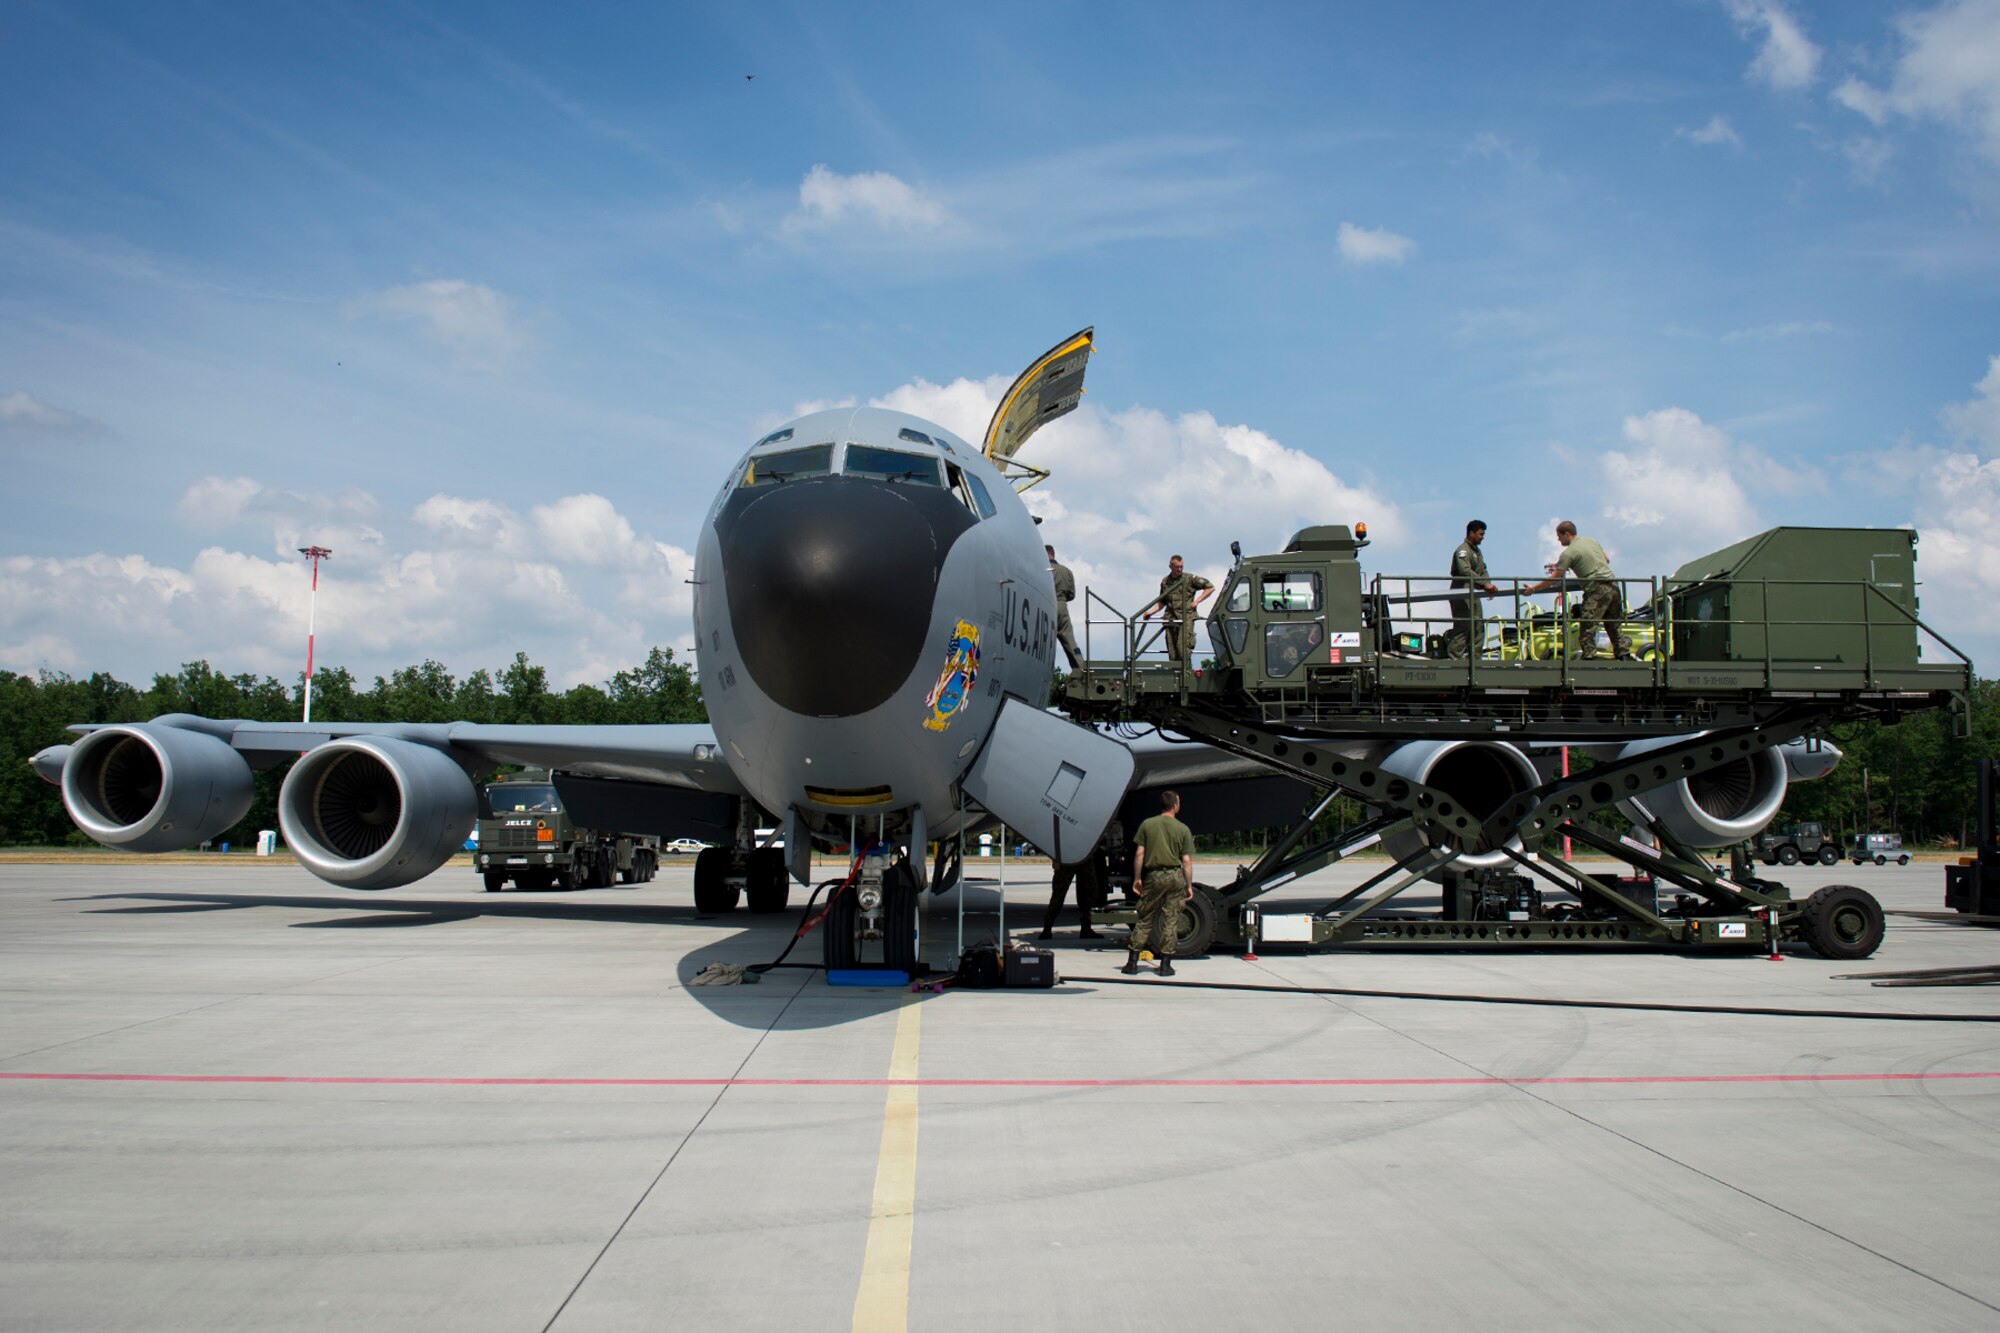 U.S. Air Force and Polish air force service members unload a KC-135 from the 100th Air Refueling Wing, England, in preparation for Baltic Operations 2016 at Powidz Air Base, Poland, June 2, 2016. BALTOPS 2016, scheduled for June 3-19, 2016 in Estonia, Finland, Germany, Sweden, Poland, and throughout the Baltic Sea, is a joint, multinational, maritime-focused exercise designed to enhance flexibility and interoperability, as well as demonstrate resolve among NATO and partner forces to defend the Baltic region. The exercise will involve maritime, ground, and air forces to strengthen combined response capabilities necessary to ensure regional stability. (U.S. Air Force photo/Senior Airman Erin Babis)